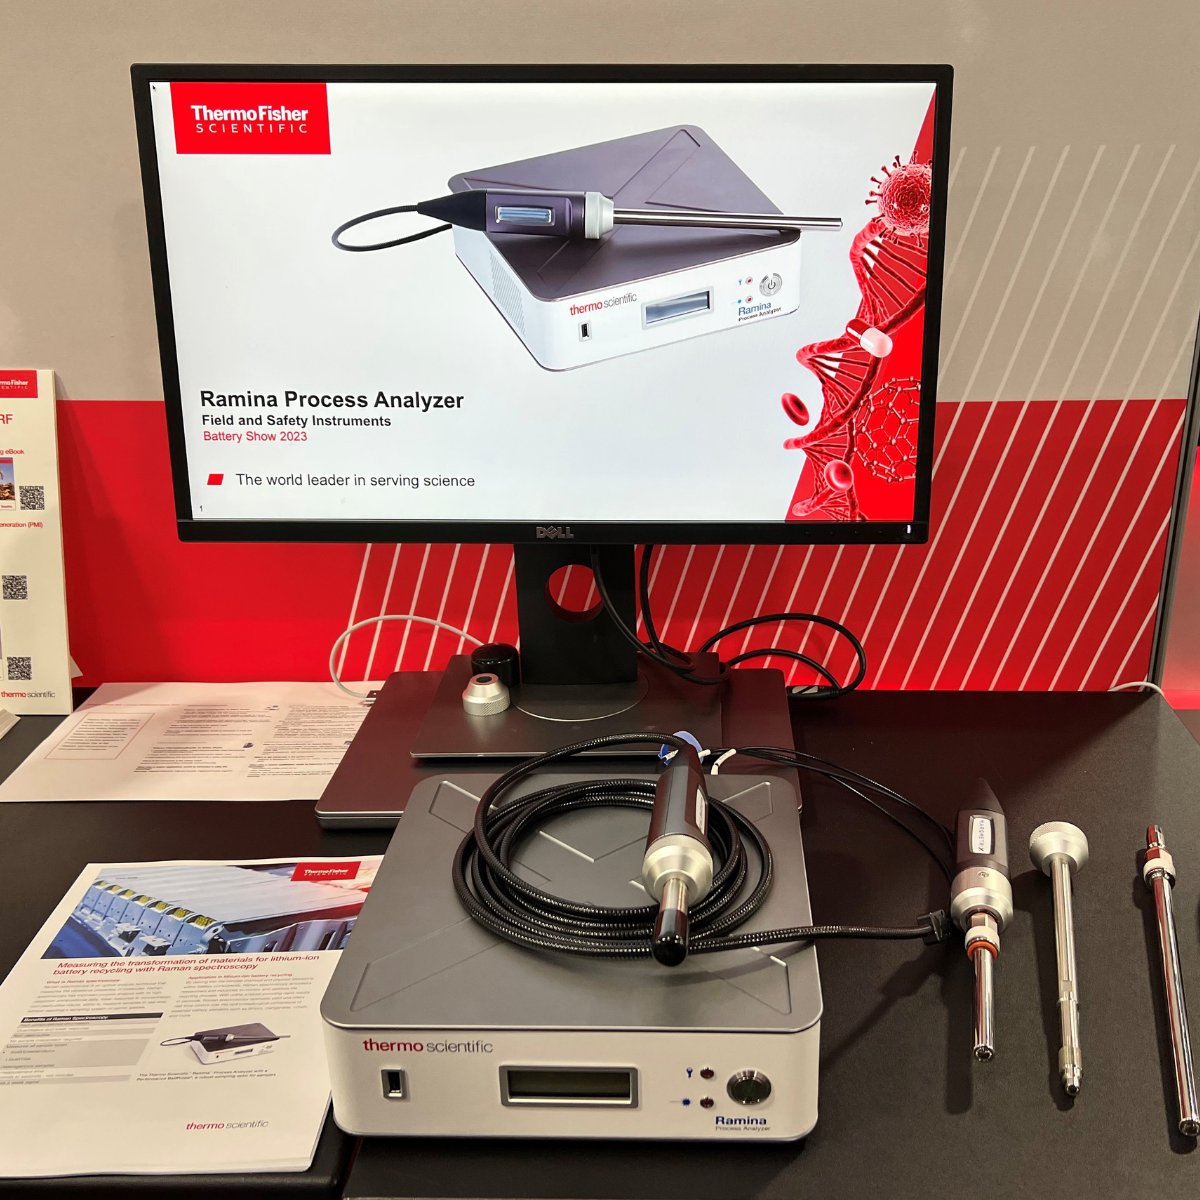 @thebatteryshow  Day 2: don't miss the Ramina Process Analyzer at the @thermofisher booth! Brian Marquardt Ph.D. and Scott Van Vuren are onsite ready to show how Raman offers process optimization in seconds for battery manufacturing and recycling.

#raman #batterymanufacturing